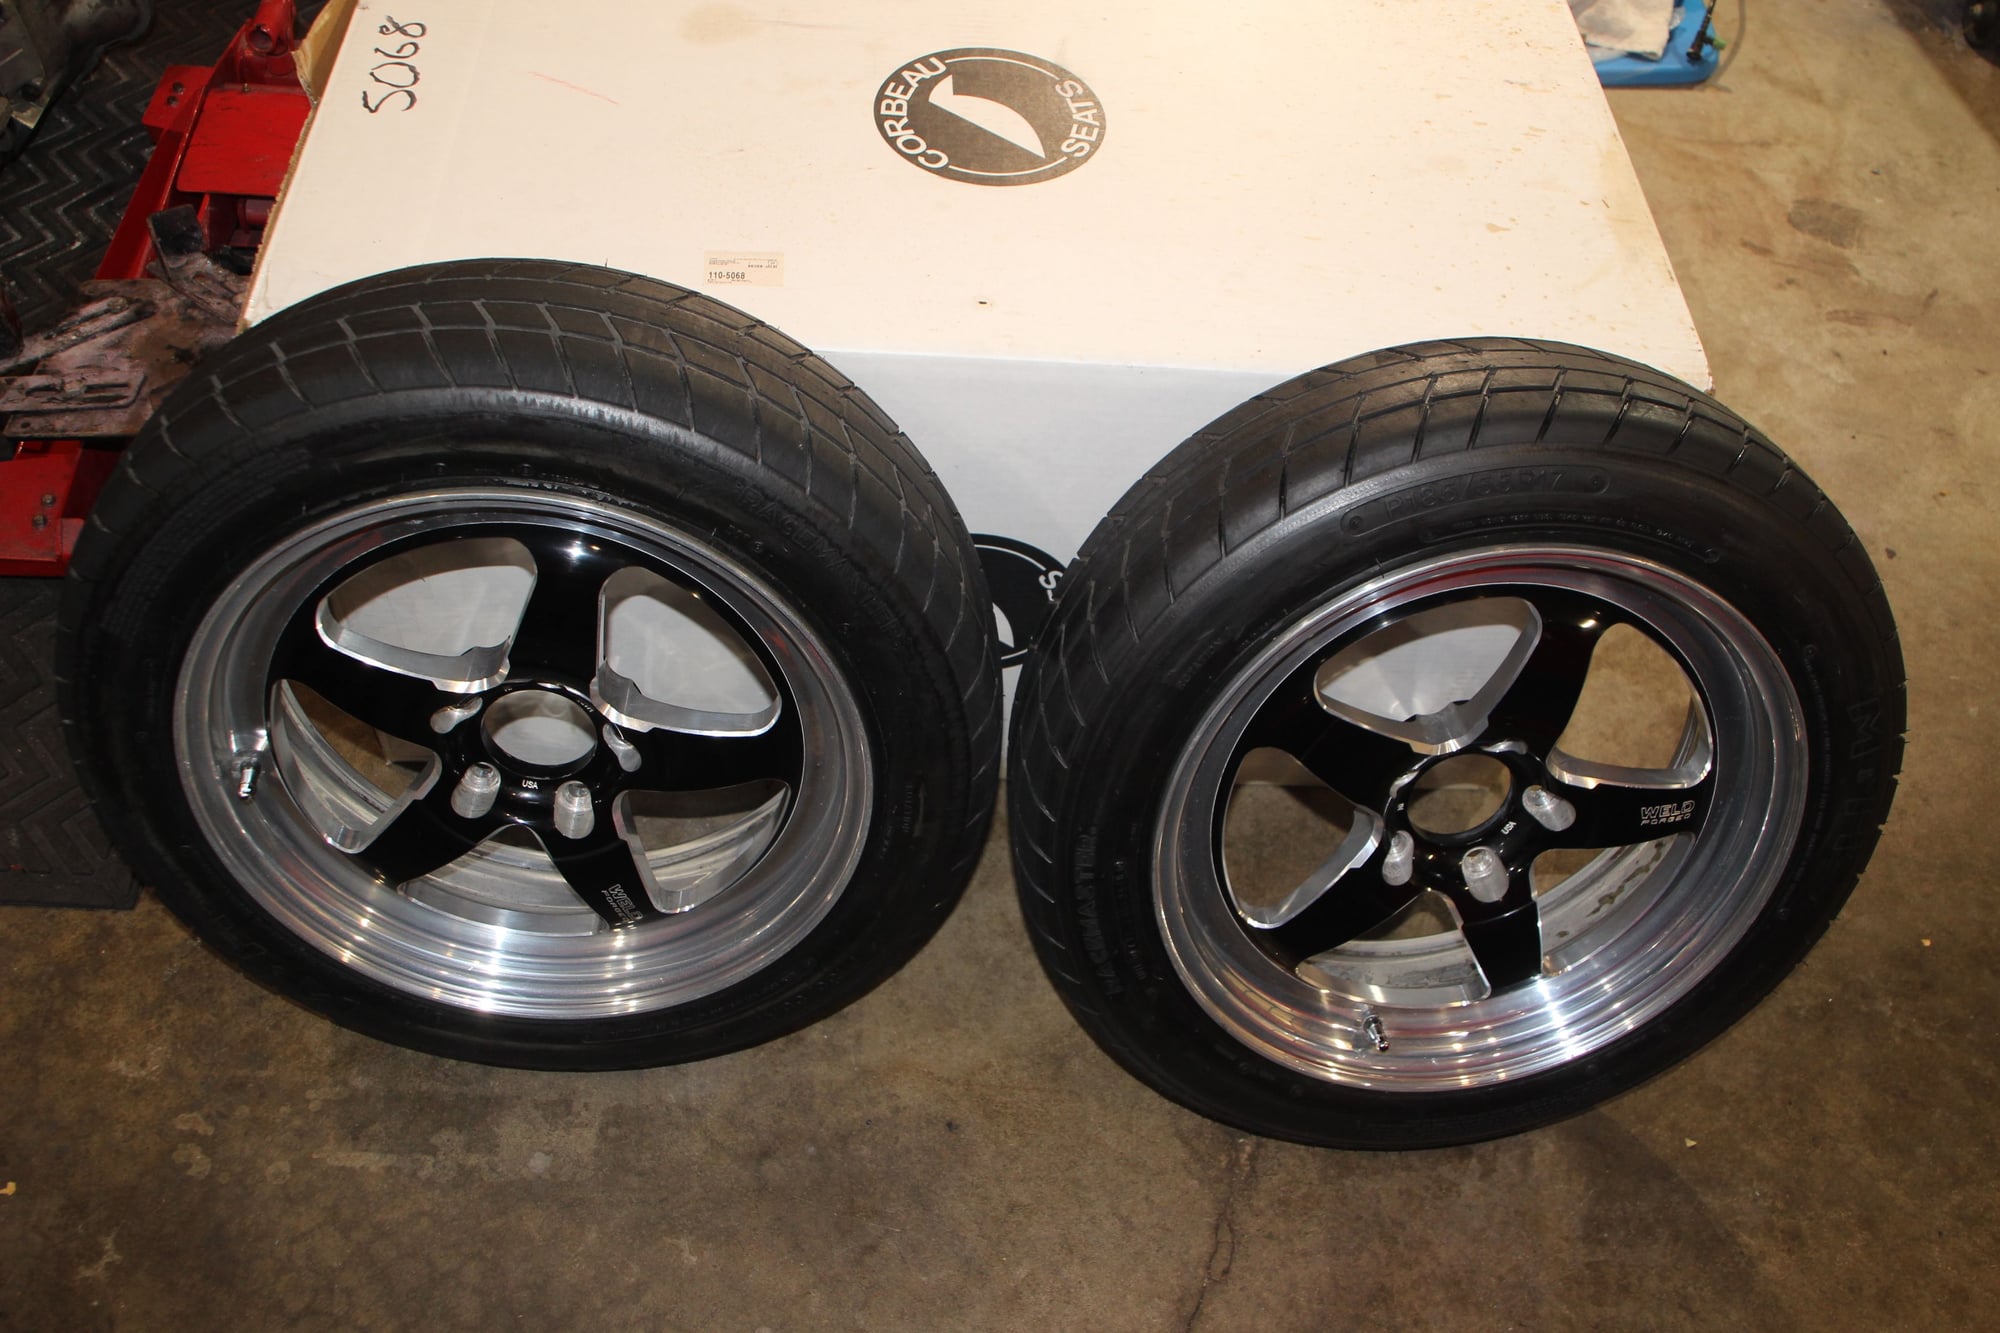  - 17" x 5.5" WELD RTS S71 Front Runners and M&H Racemaster tires - Portage, IN 46368, United States